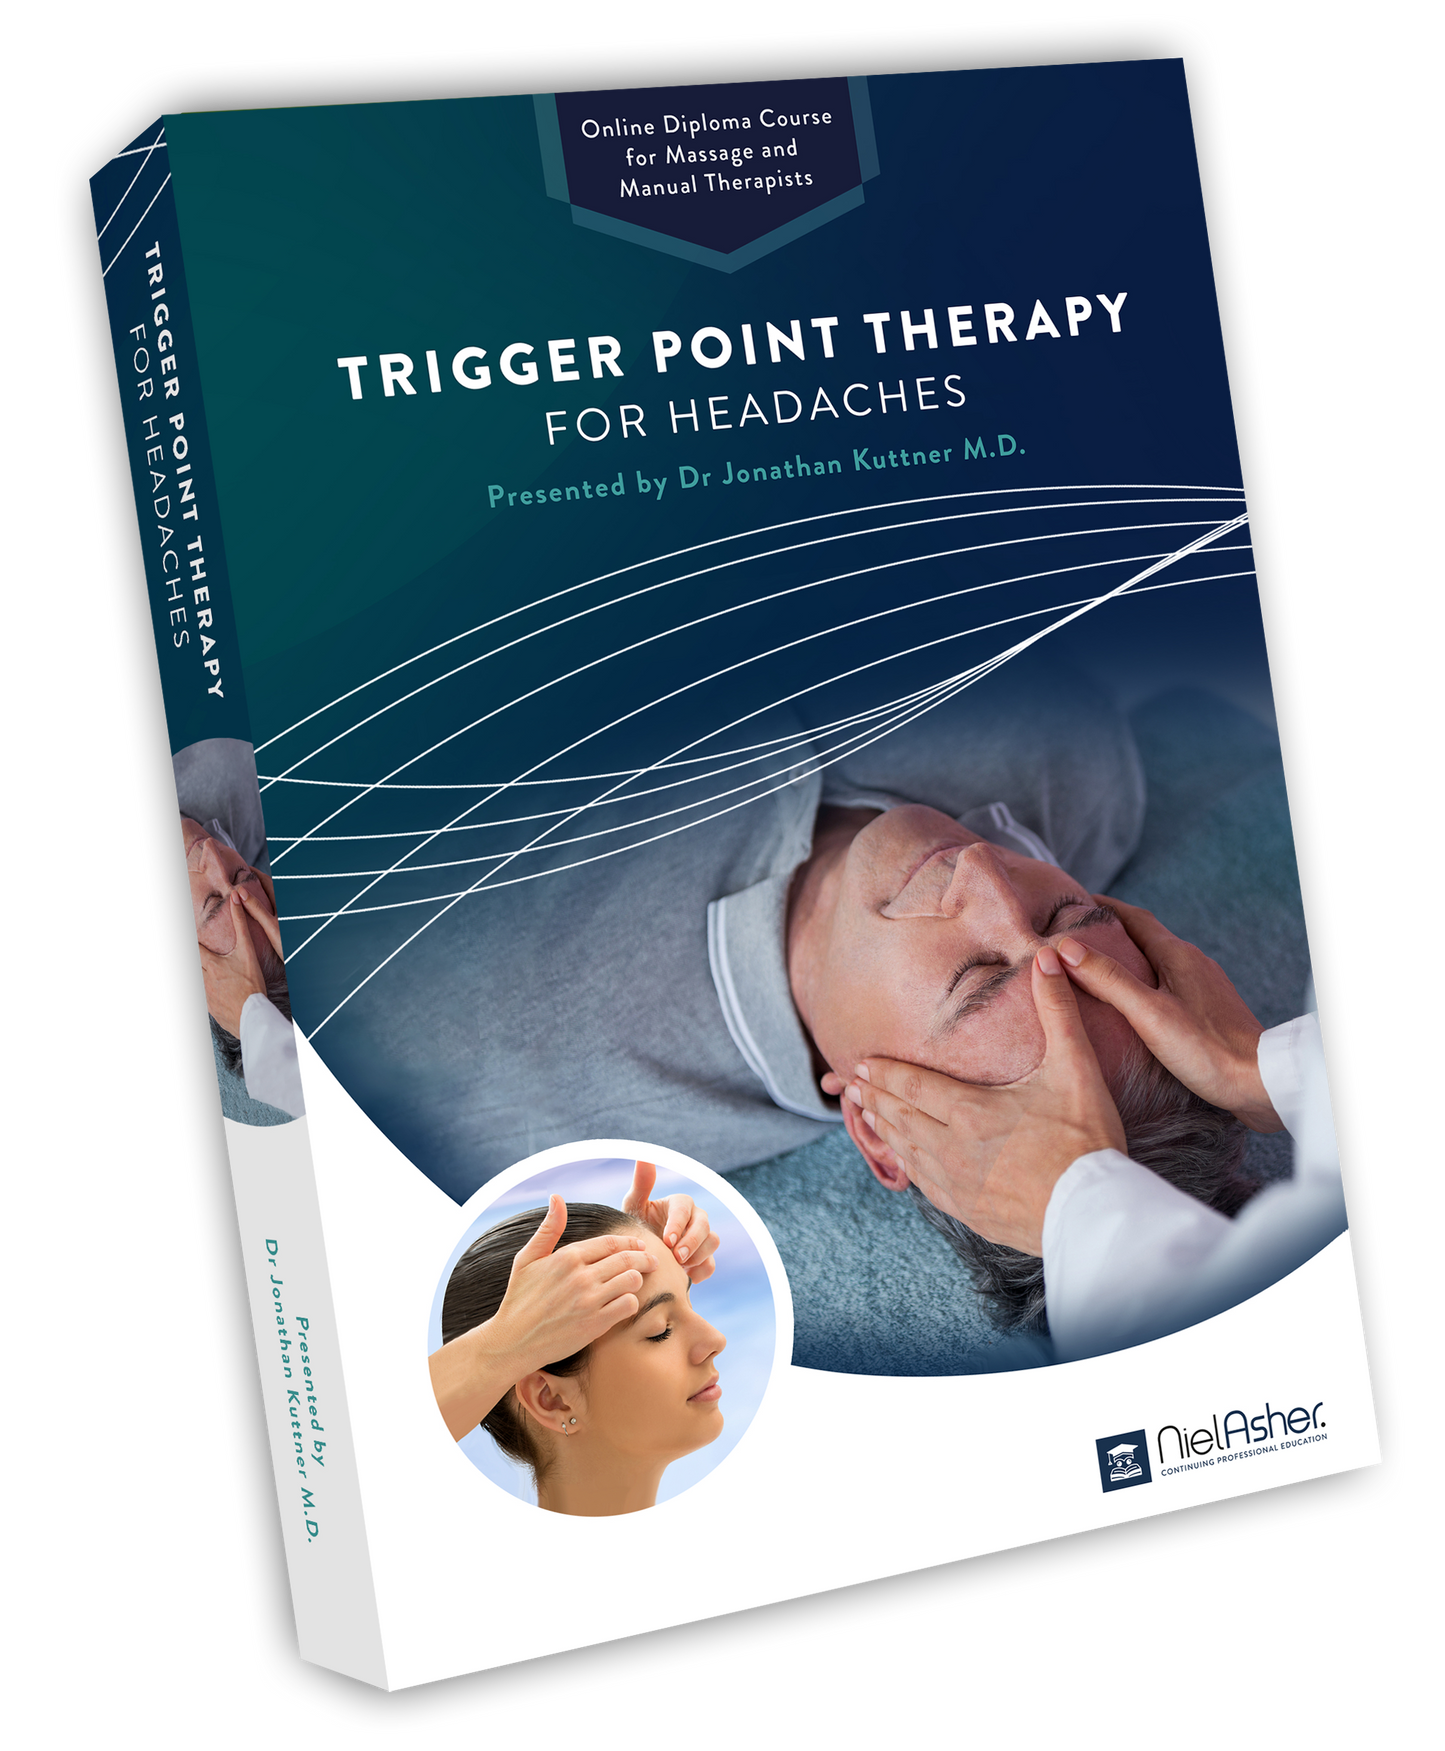 Treating Common Headaches - NAT Trigger Point Course (4 CEUs)